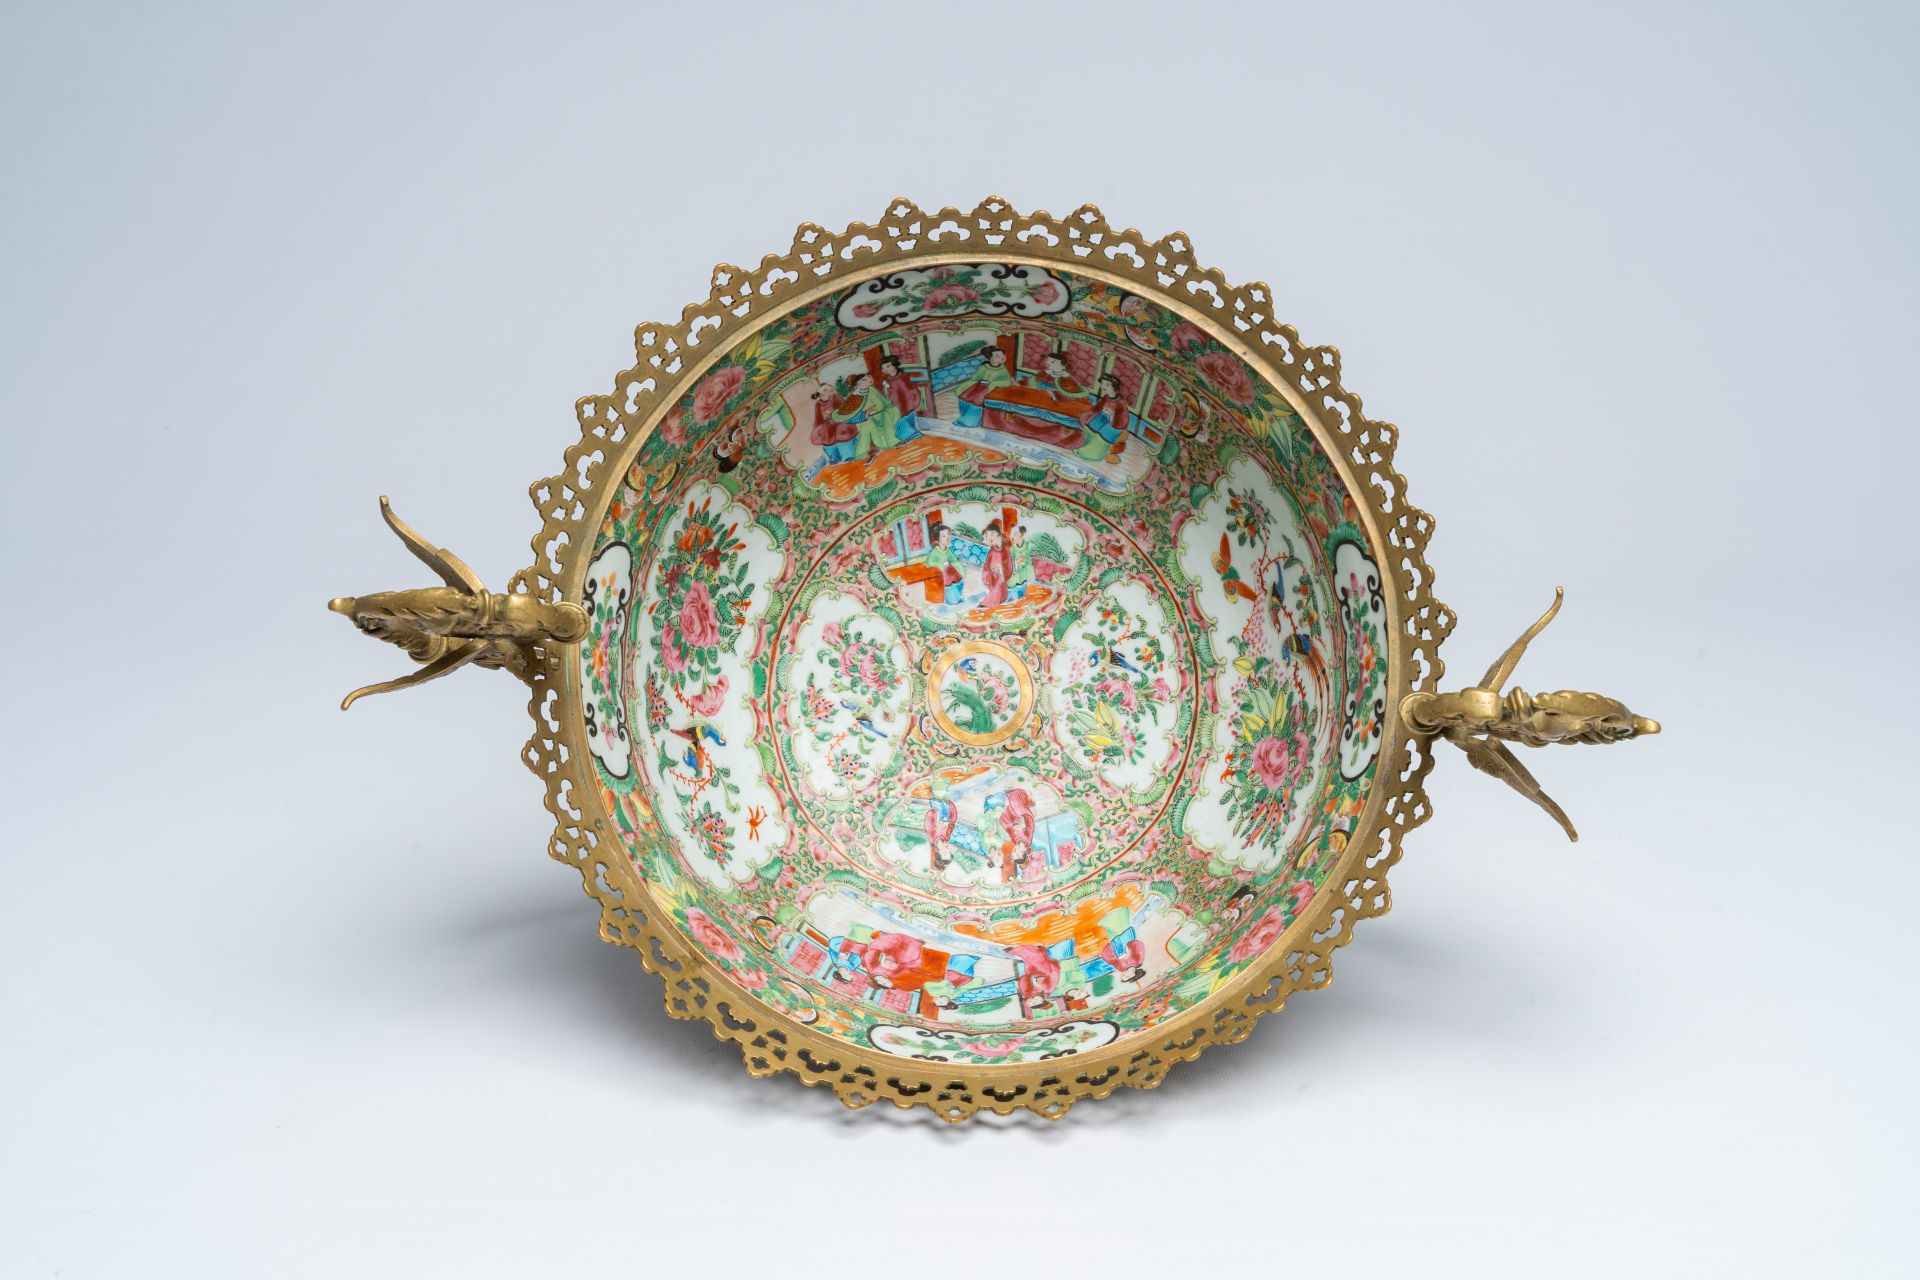 A Chinese Canton famille rose brass mounted bowl with palace scenes and floral design, 19th C. - Image 6 of 7